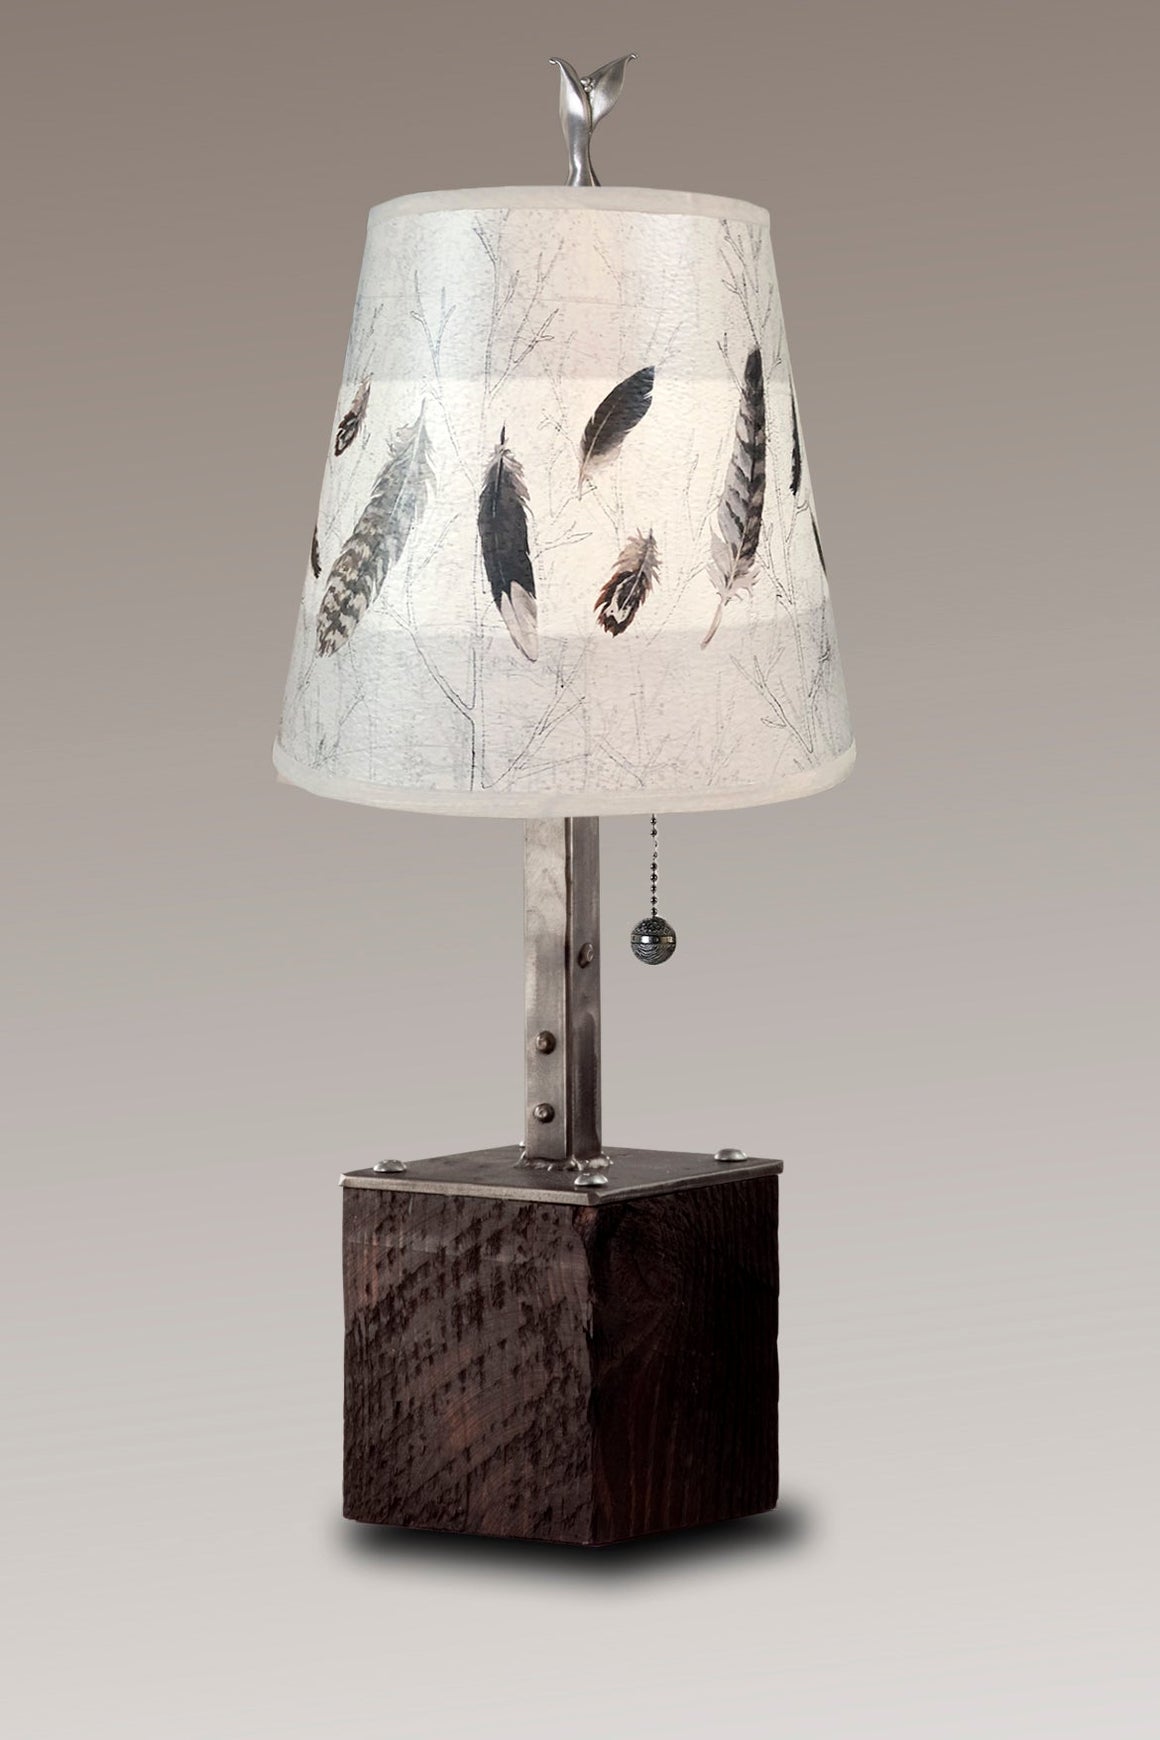 Steel Table Lamp on Reclaimed Wood with Small Drum Shade in Feathers in Pebble